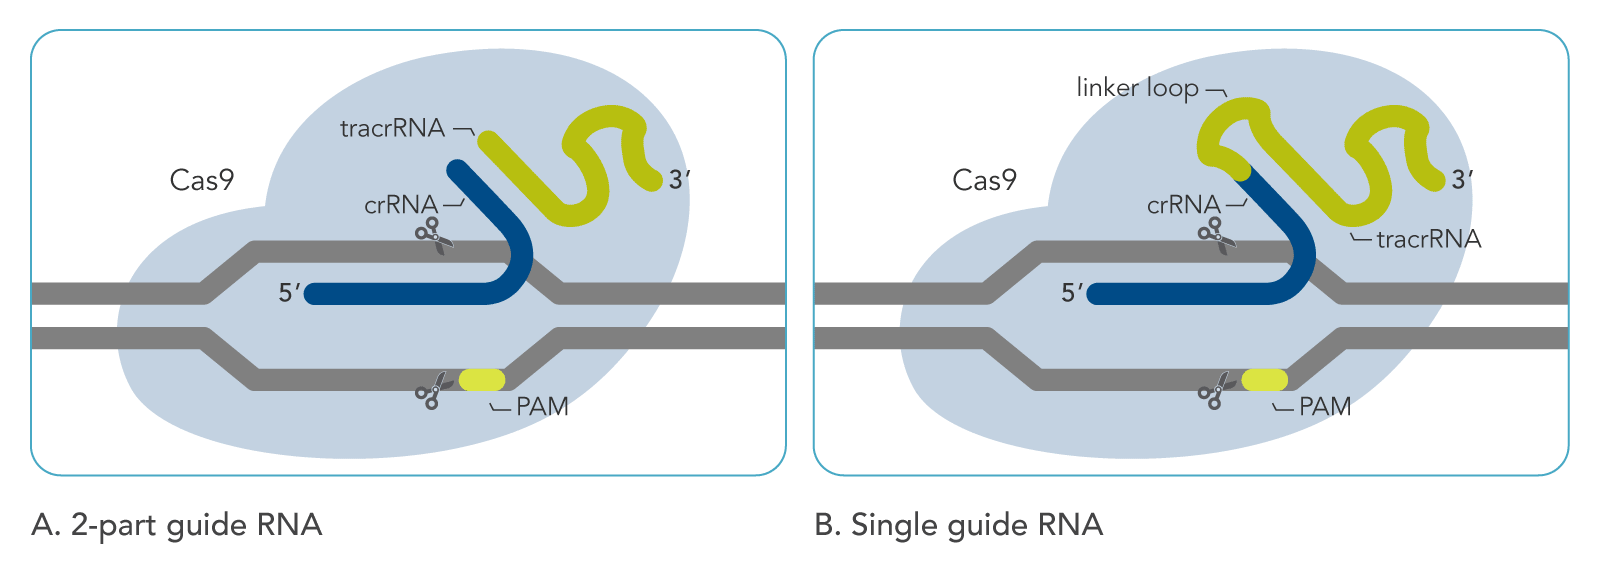  Comparison of synthetic tracrRNA:crRNA and sgRNA